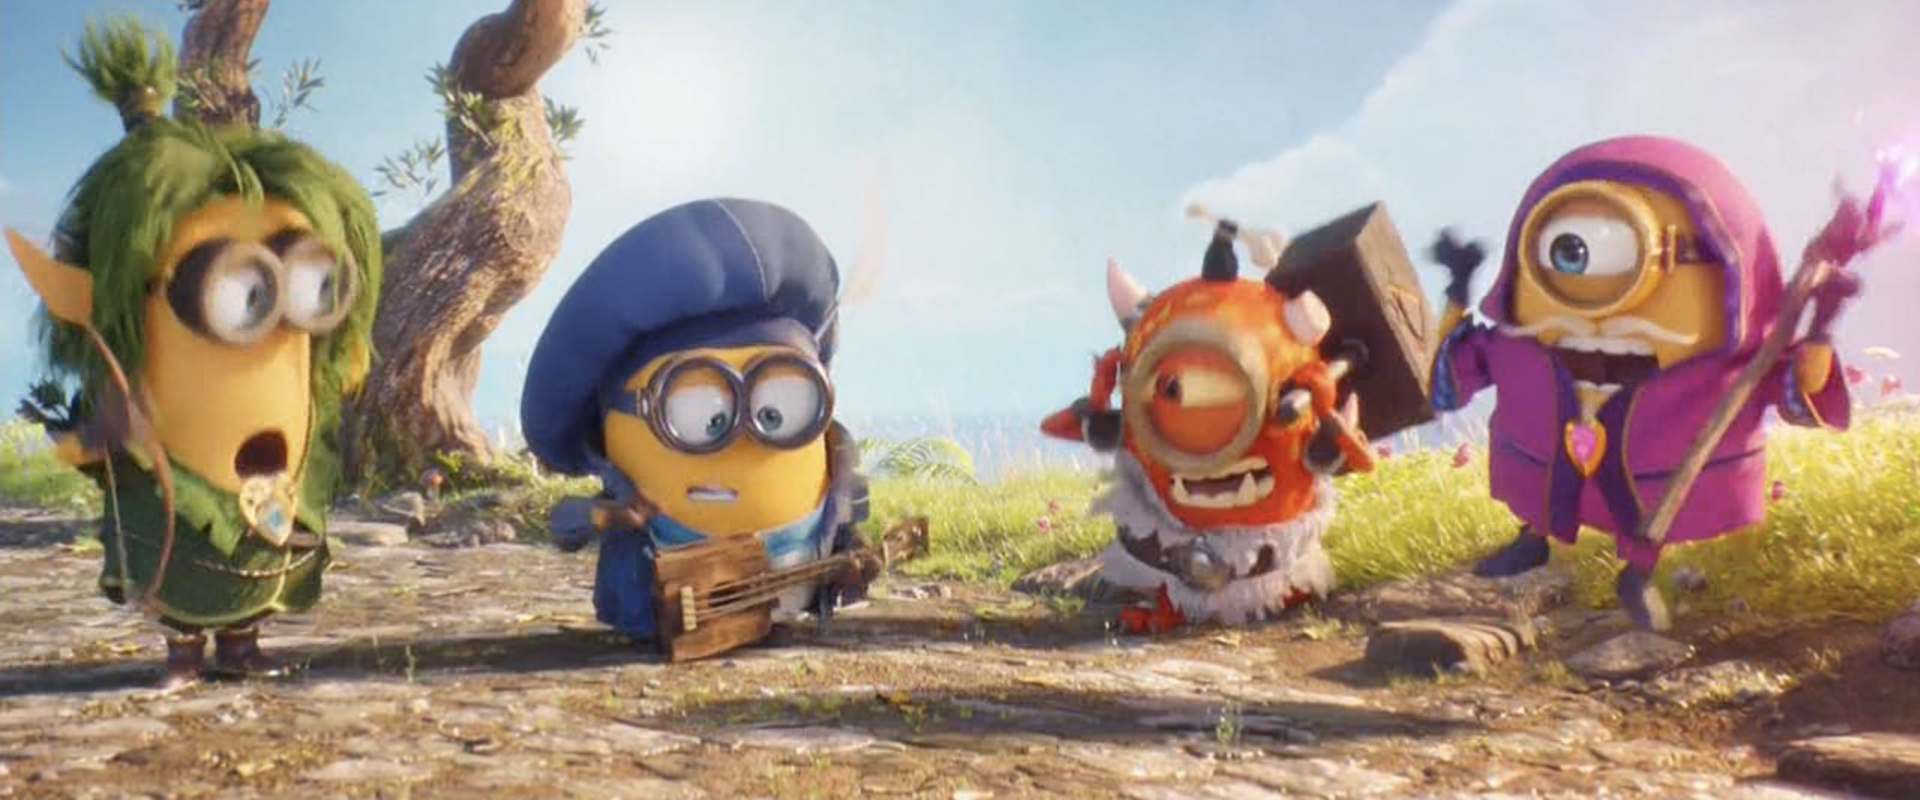 Minions and Monsters background 1